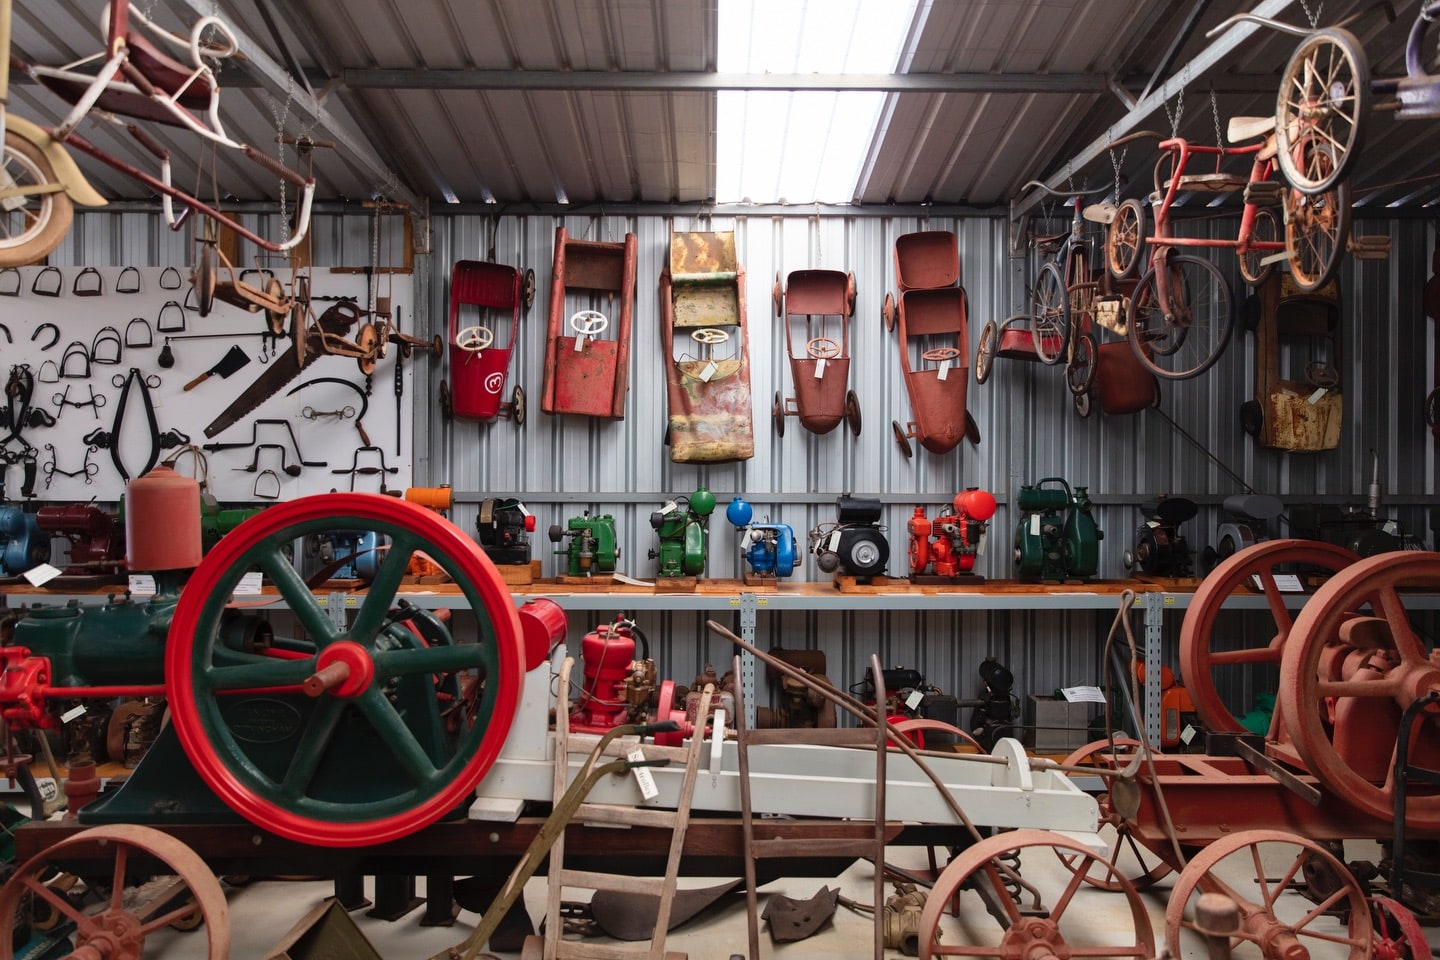 A shed with vintage farm equipment, bicycles and toy cars on display.